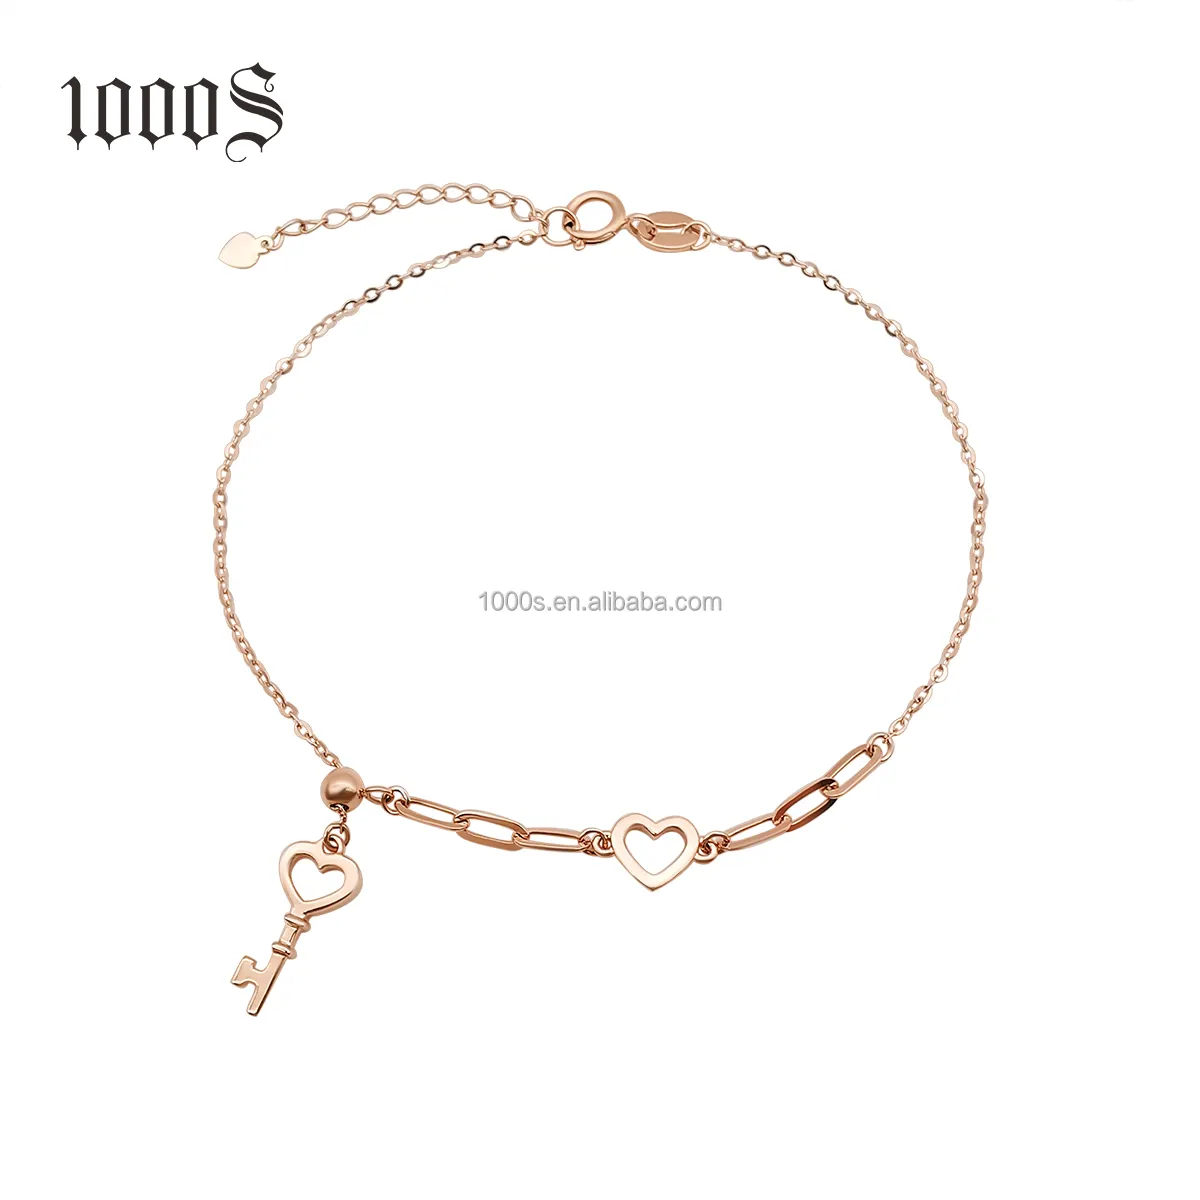 Newest Design 18K Solid Gold Bracelet With Heart Key Charms Bracelets For Gift Jewelry